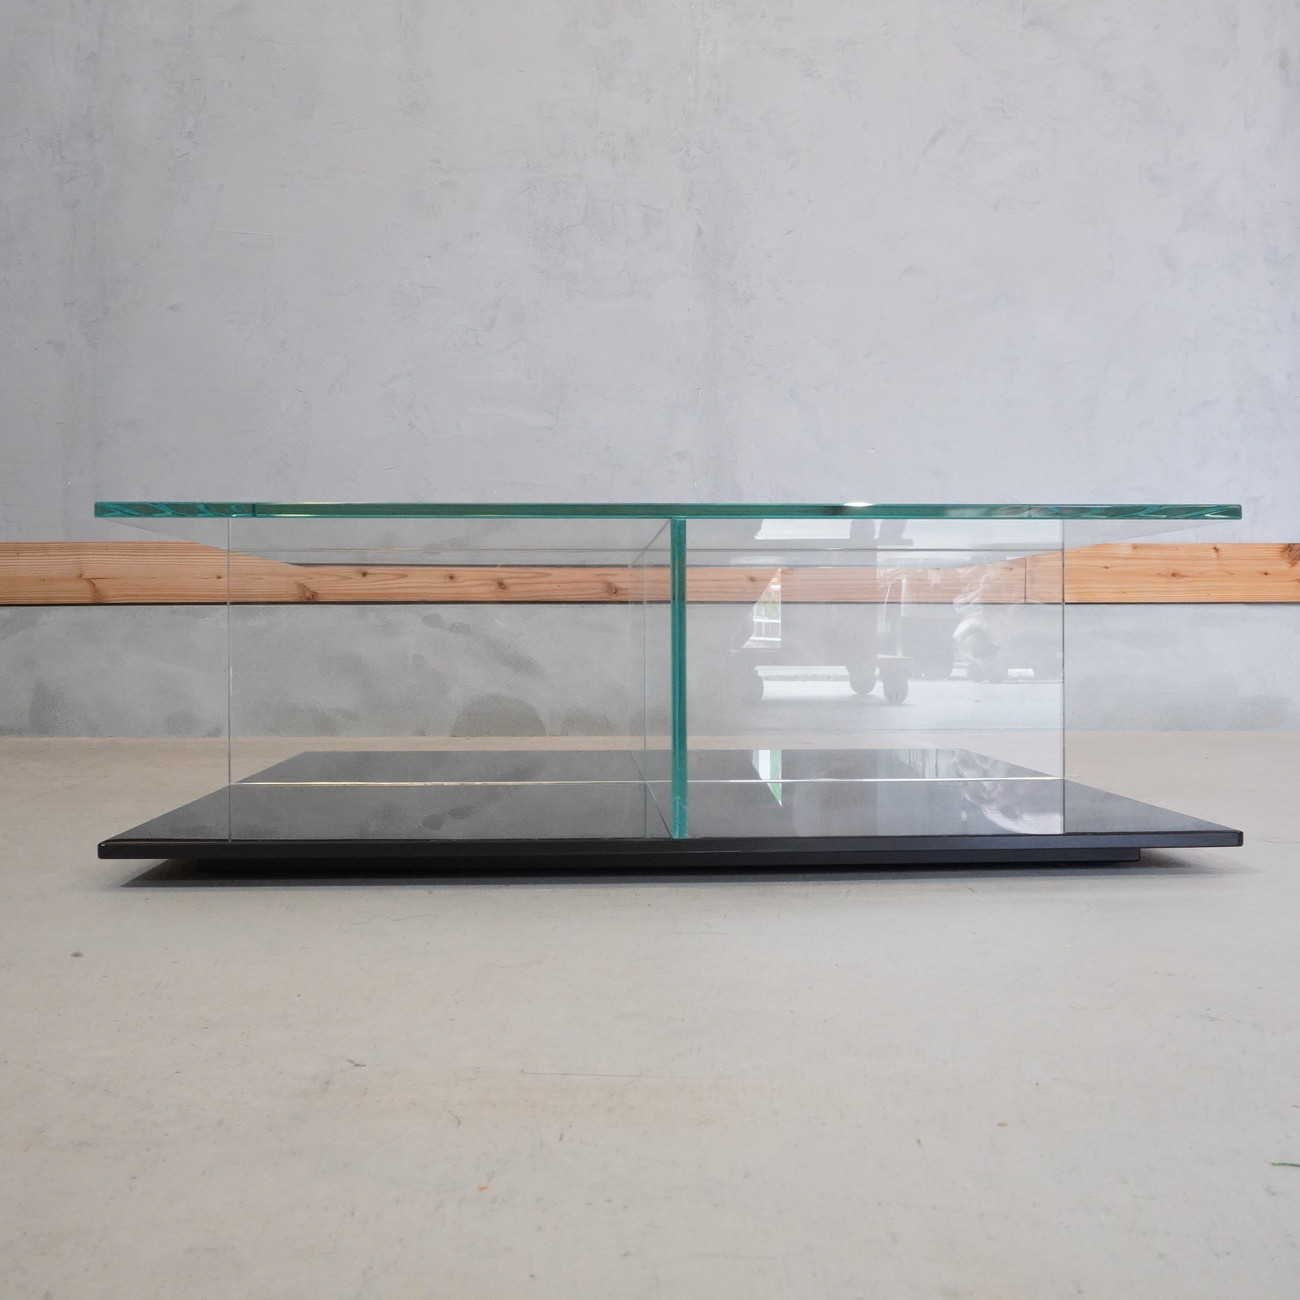 Cassina ixc.kasi-na269 MEX low table square type glass living table piero*liso-ni Italy high class furniture DI532